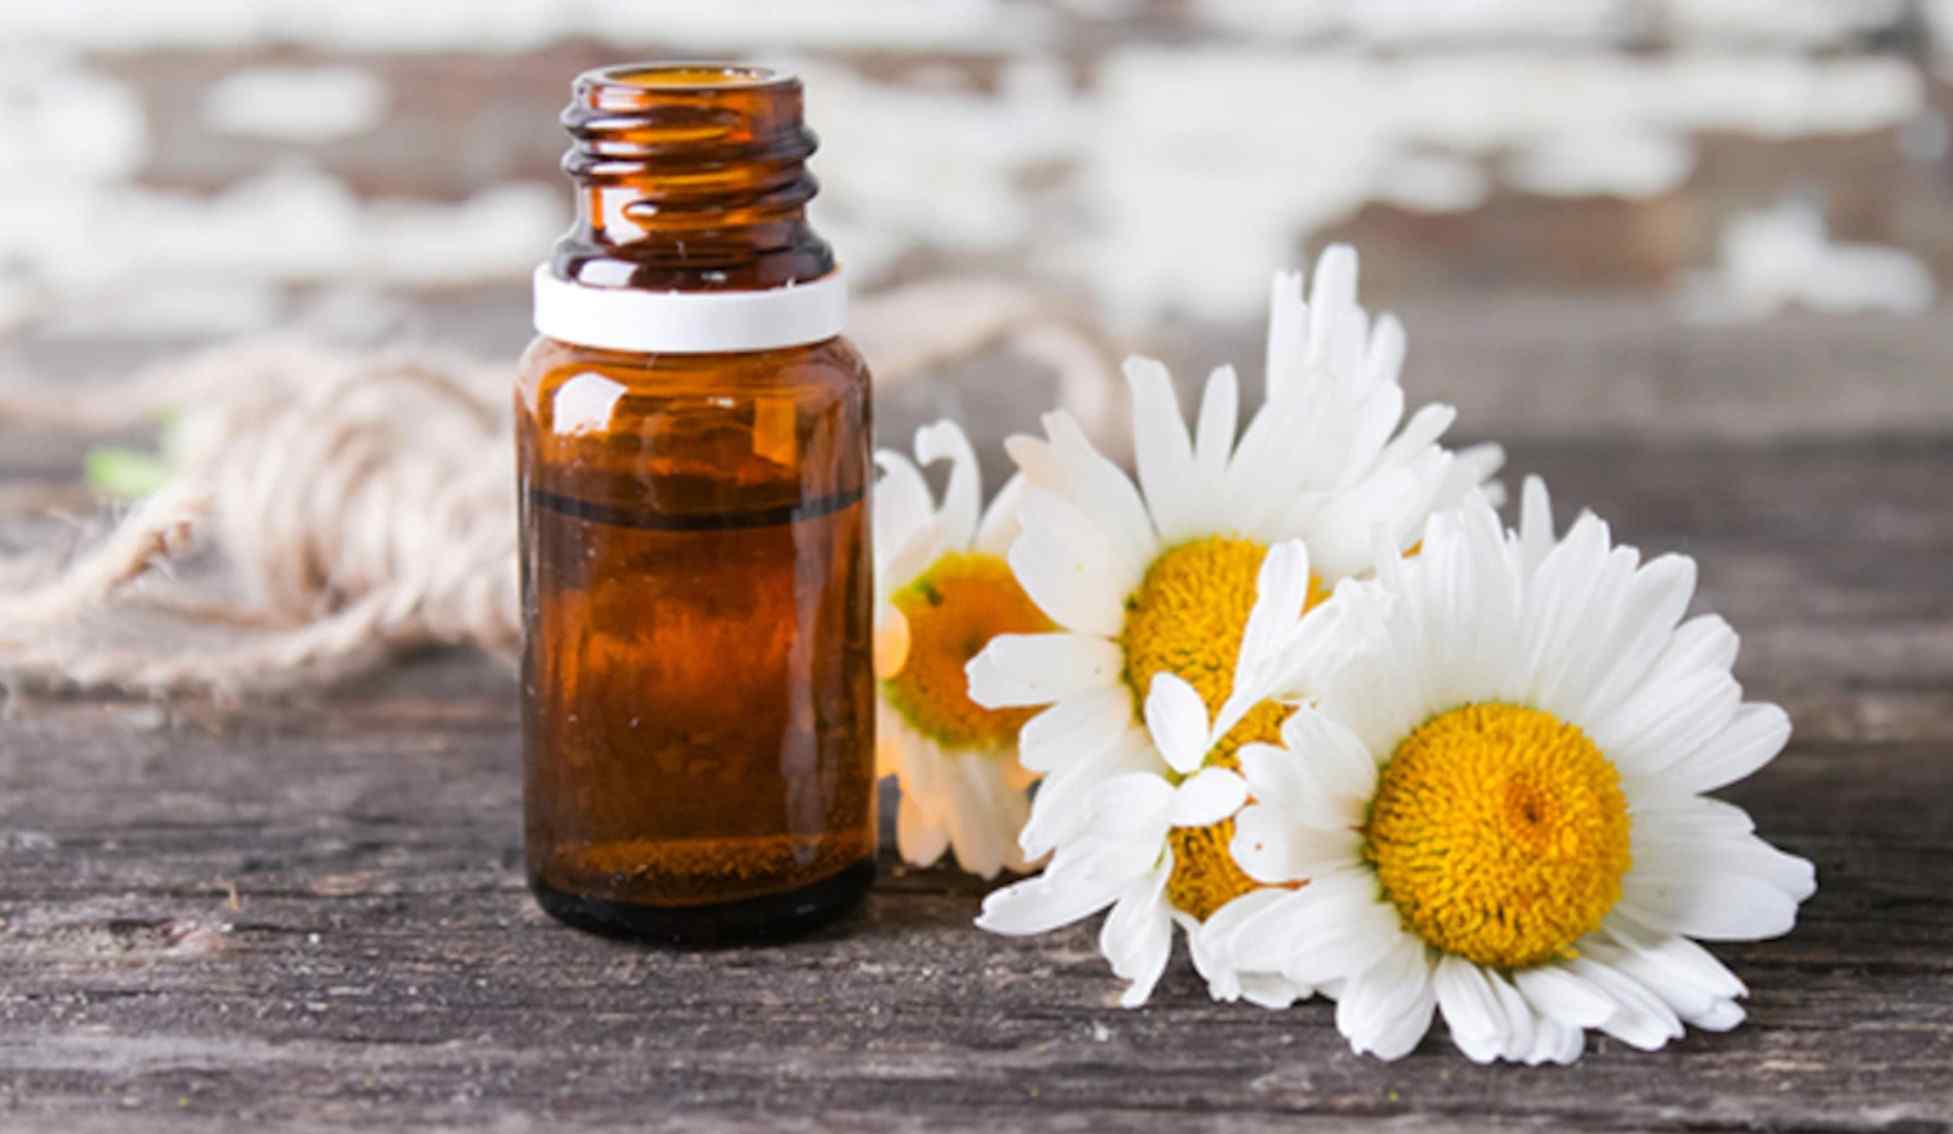 Making chamomile oil is relatively easy.